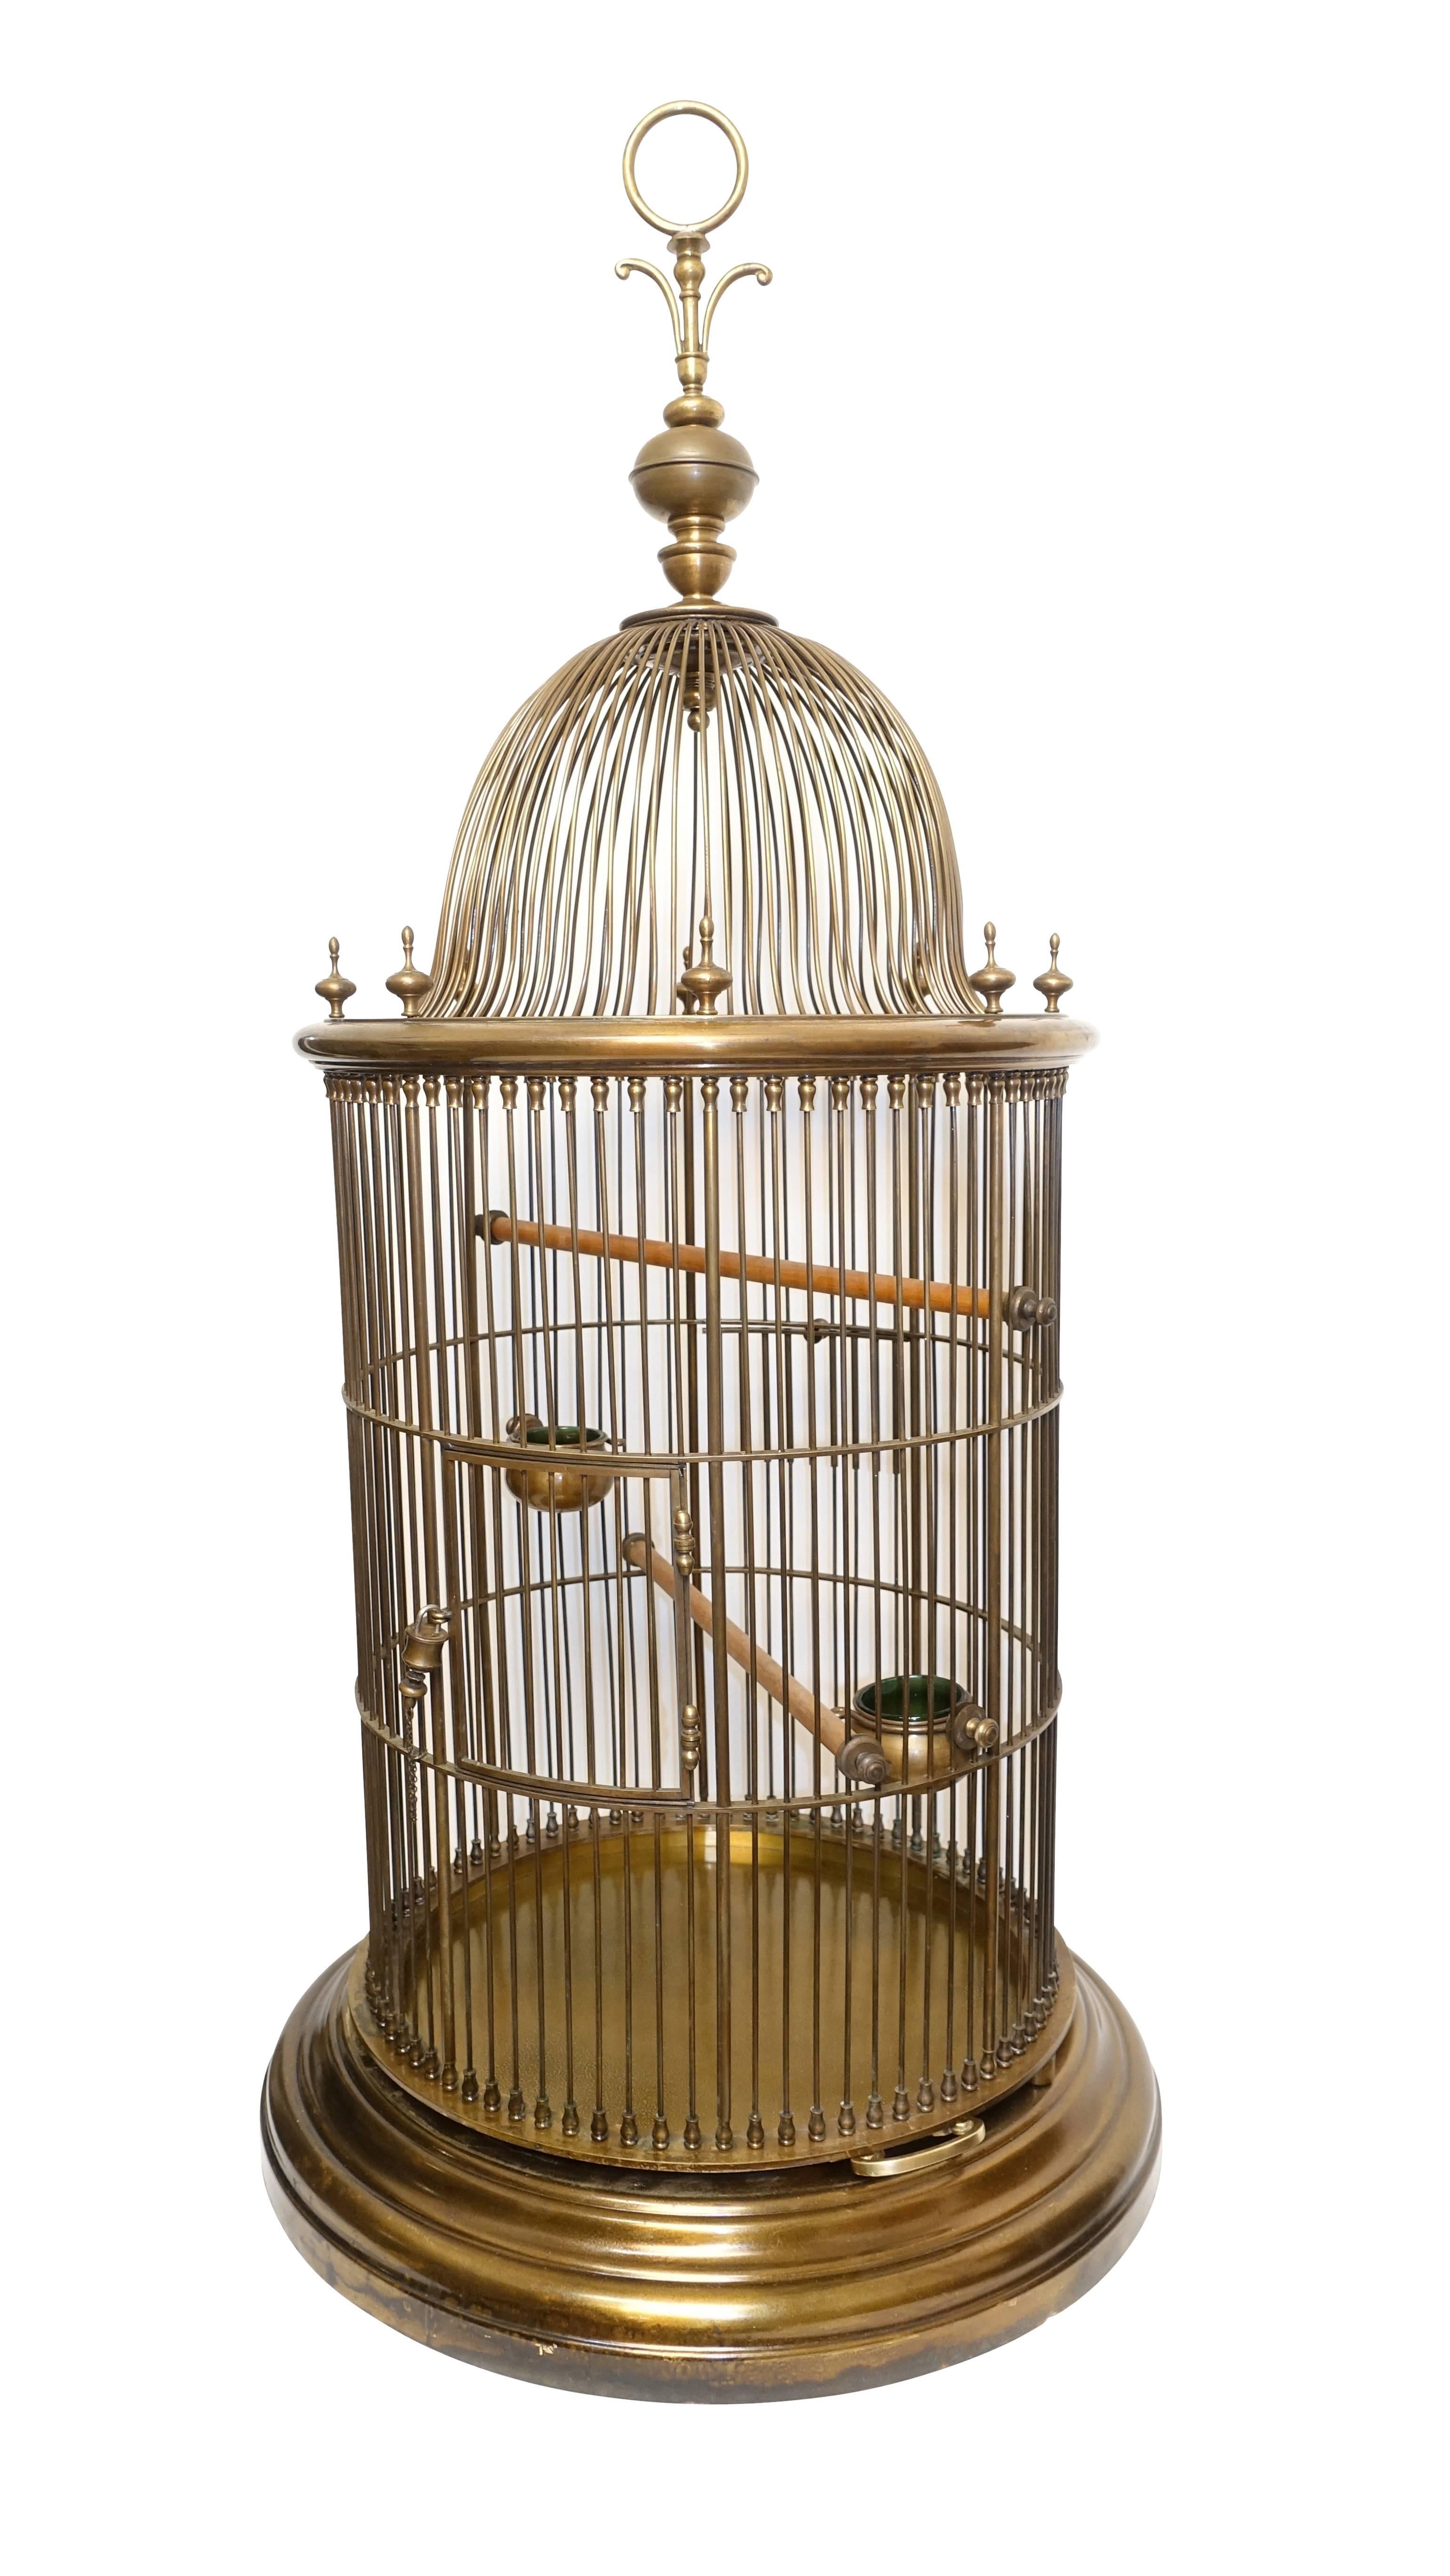 Spectacular and large solid bronze bird cage complete with green glass lined bronze feeders and with two perching rods, both rods and feeders are adjustable. Having original bronze keyed lock and a separate opening for feeding. The interior